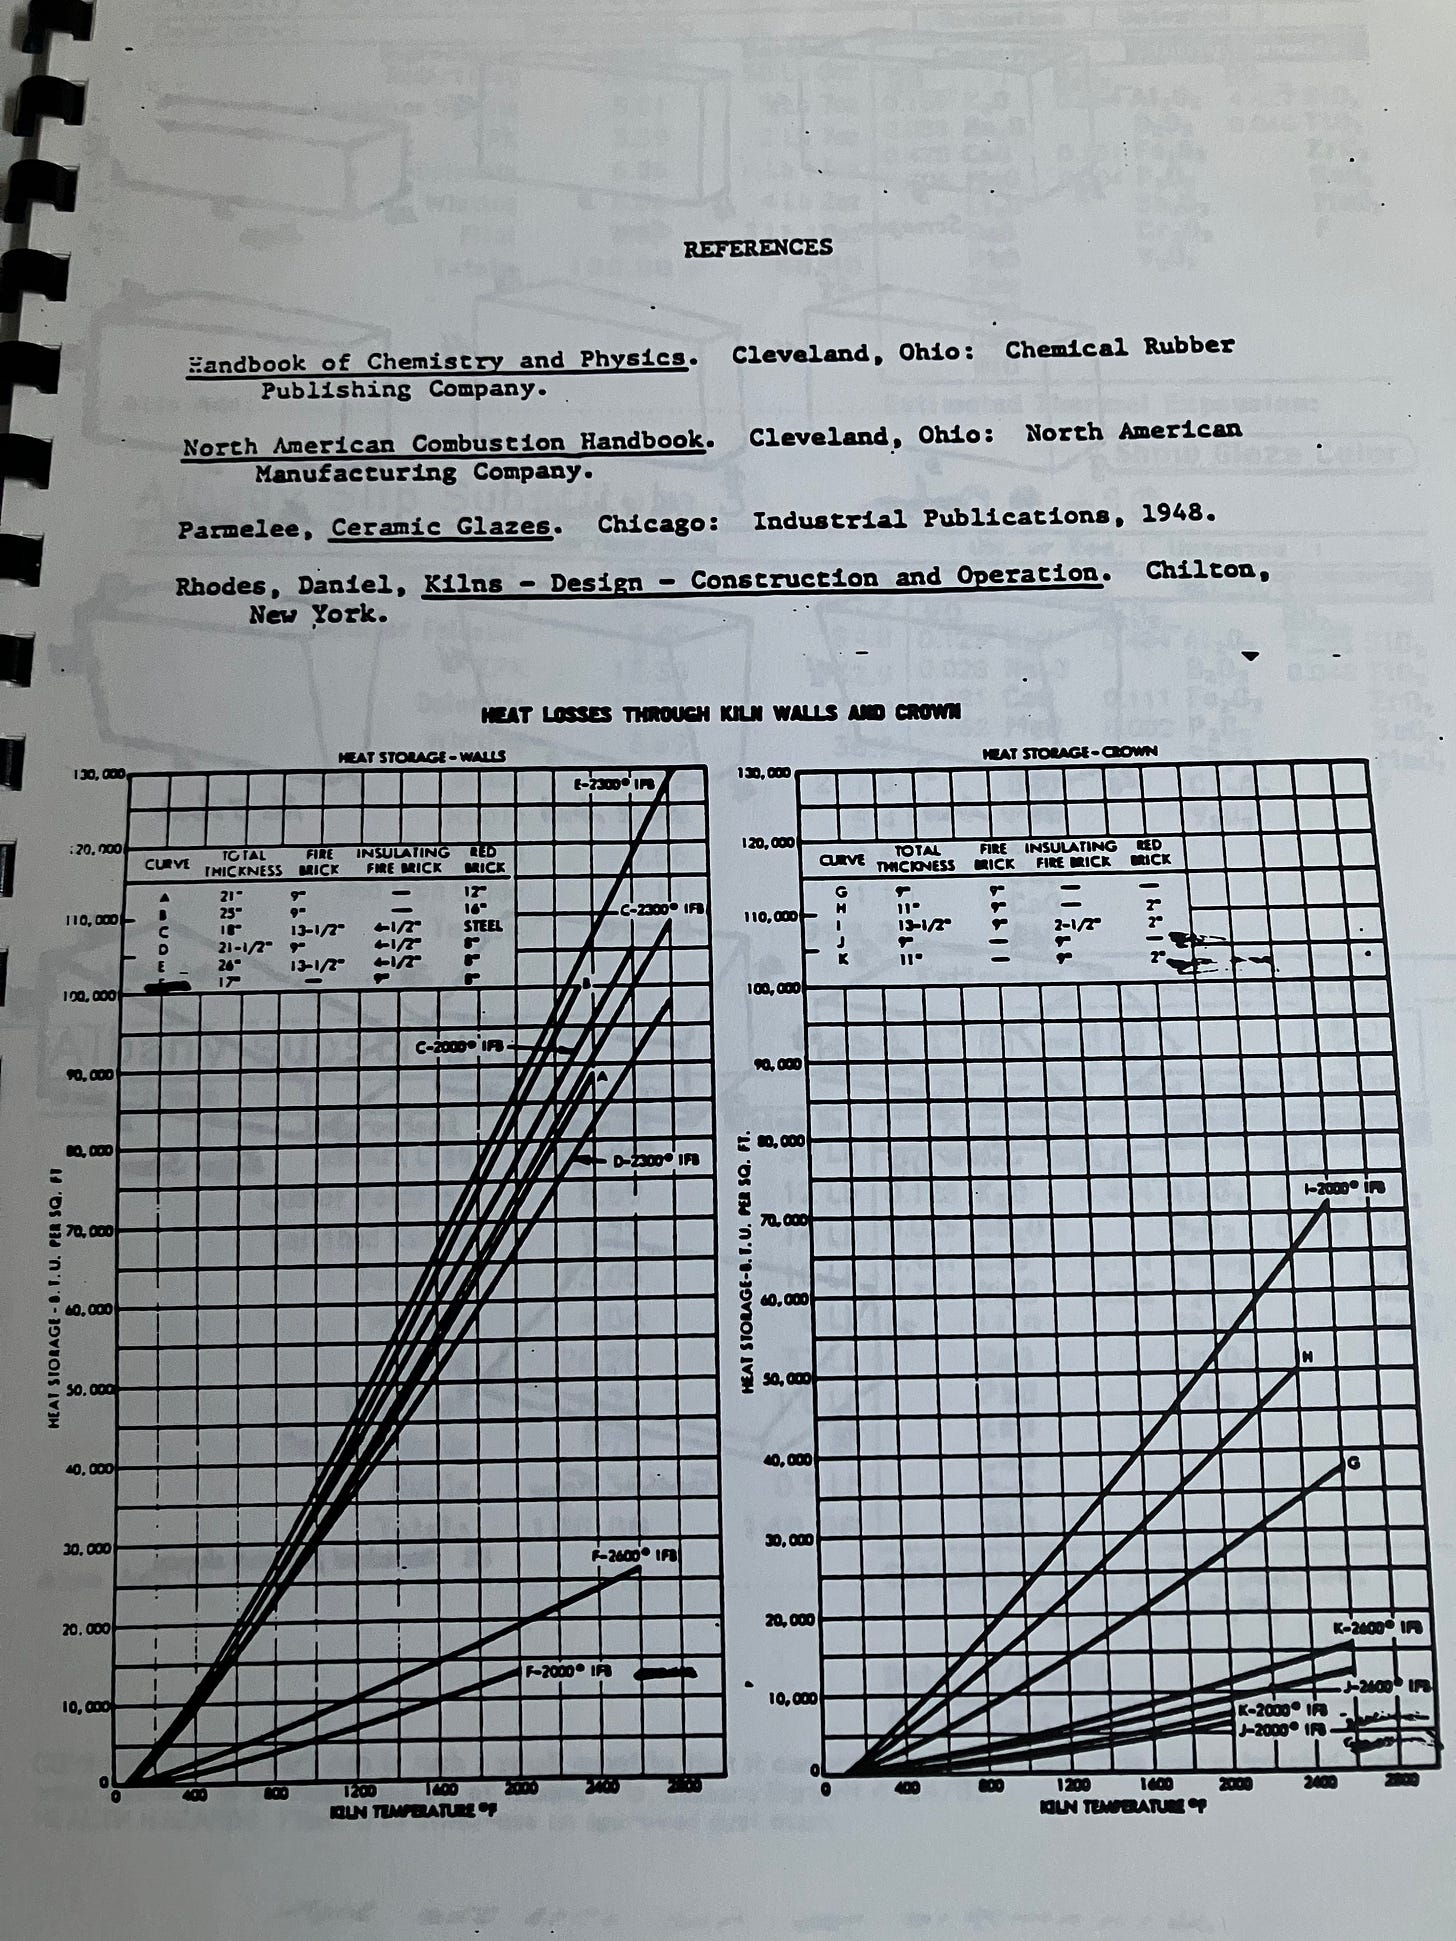 a photocopy of graphs depicting heat losses through kiln walls and crown